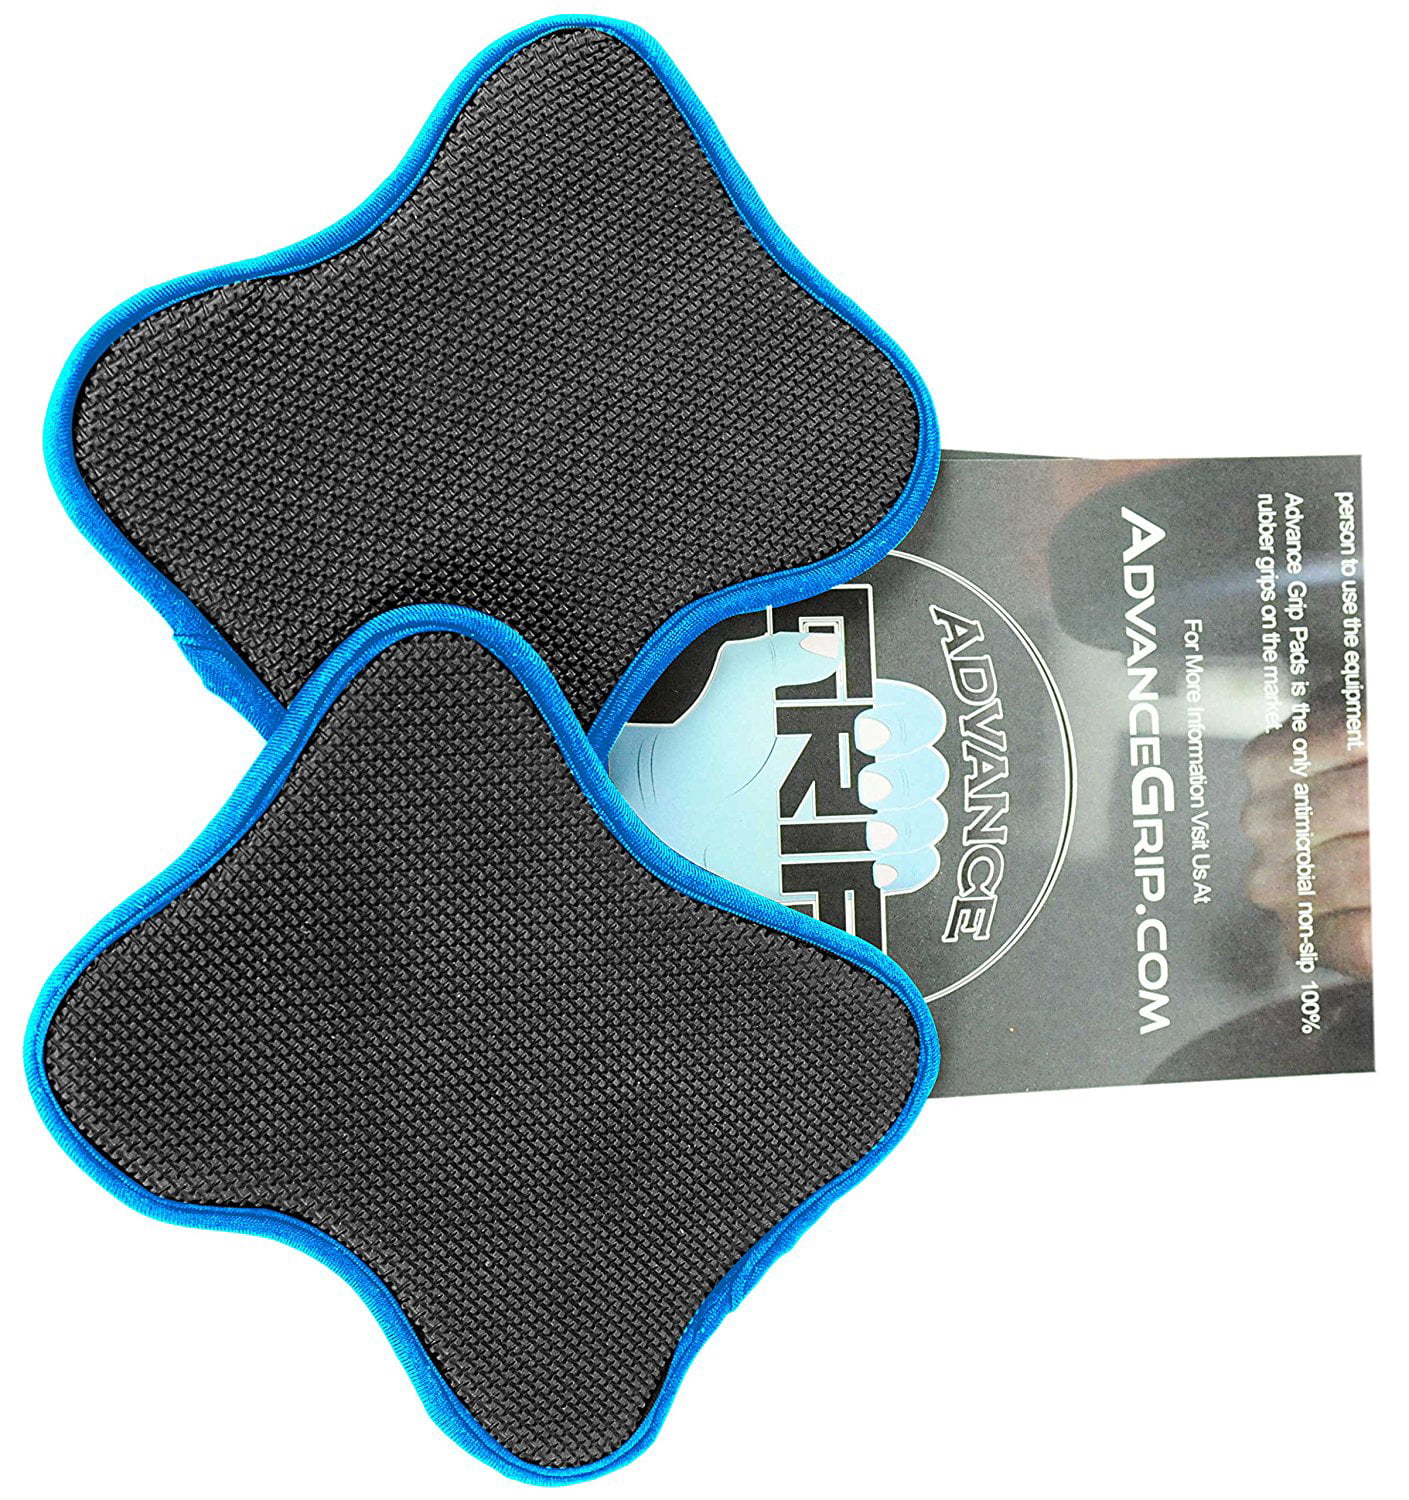 Multi Purpose Fitness Lifting Double Sided NEOPRENE Grip Gloves 1 Pair Grip Pad